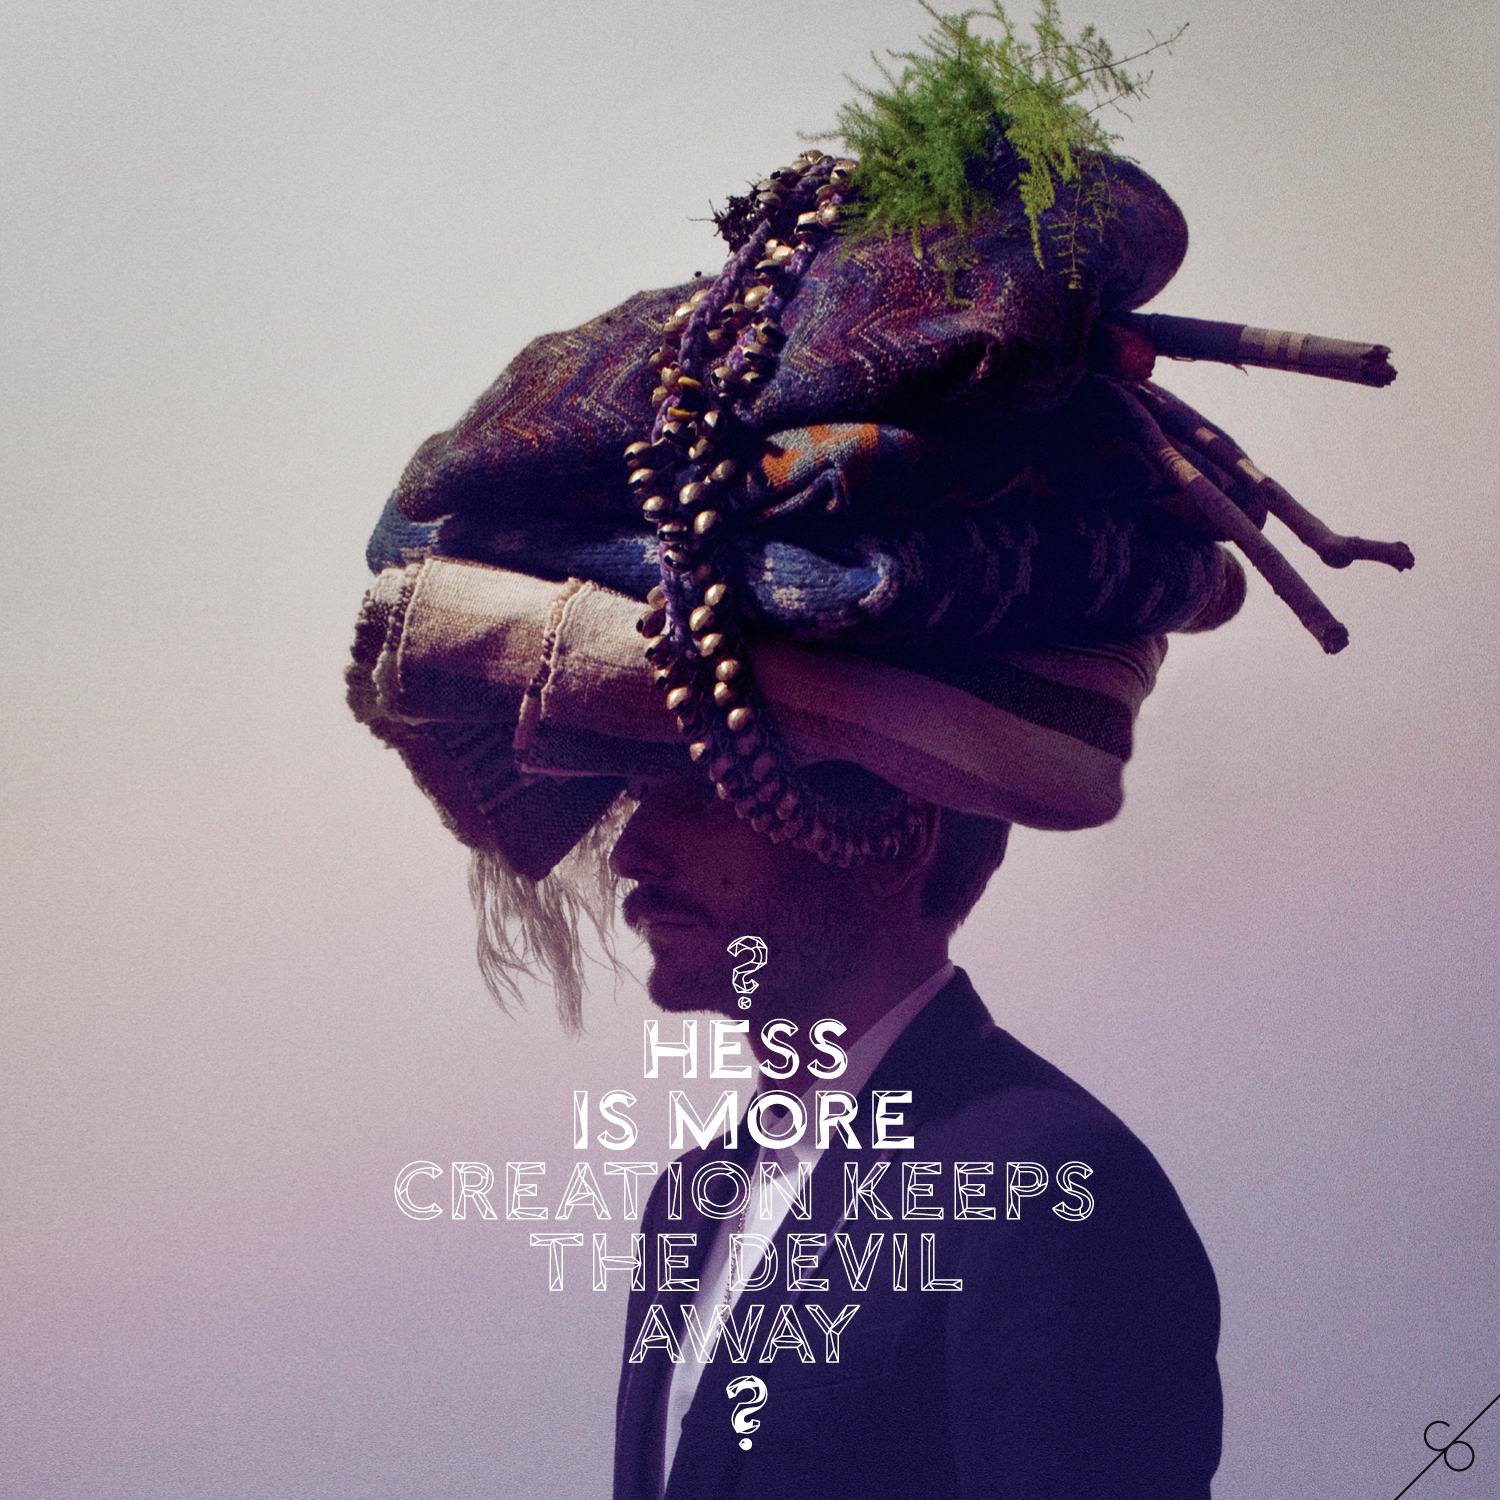 Creation Keeps The Devil Away - Hess Is More